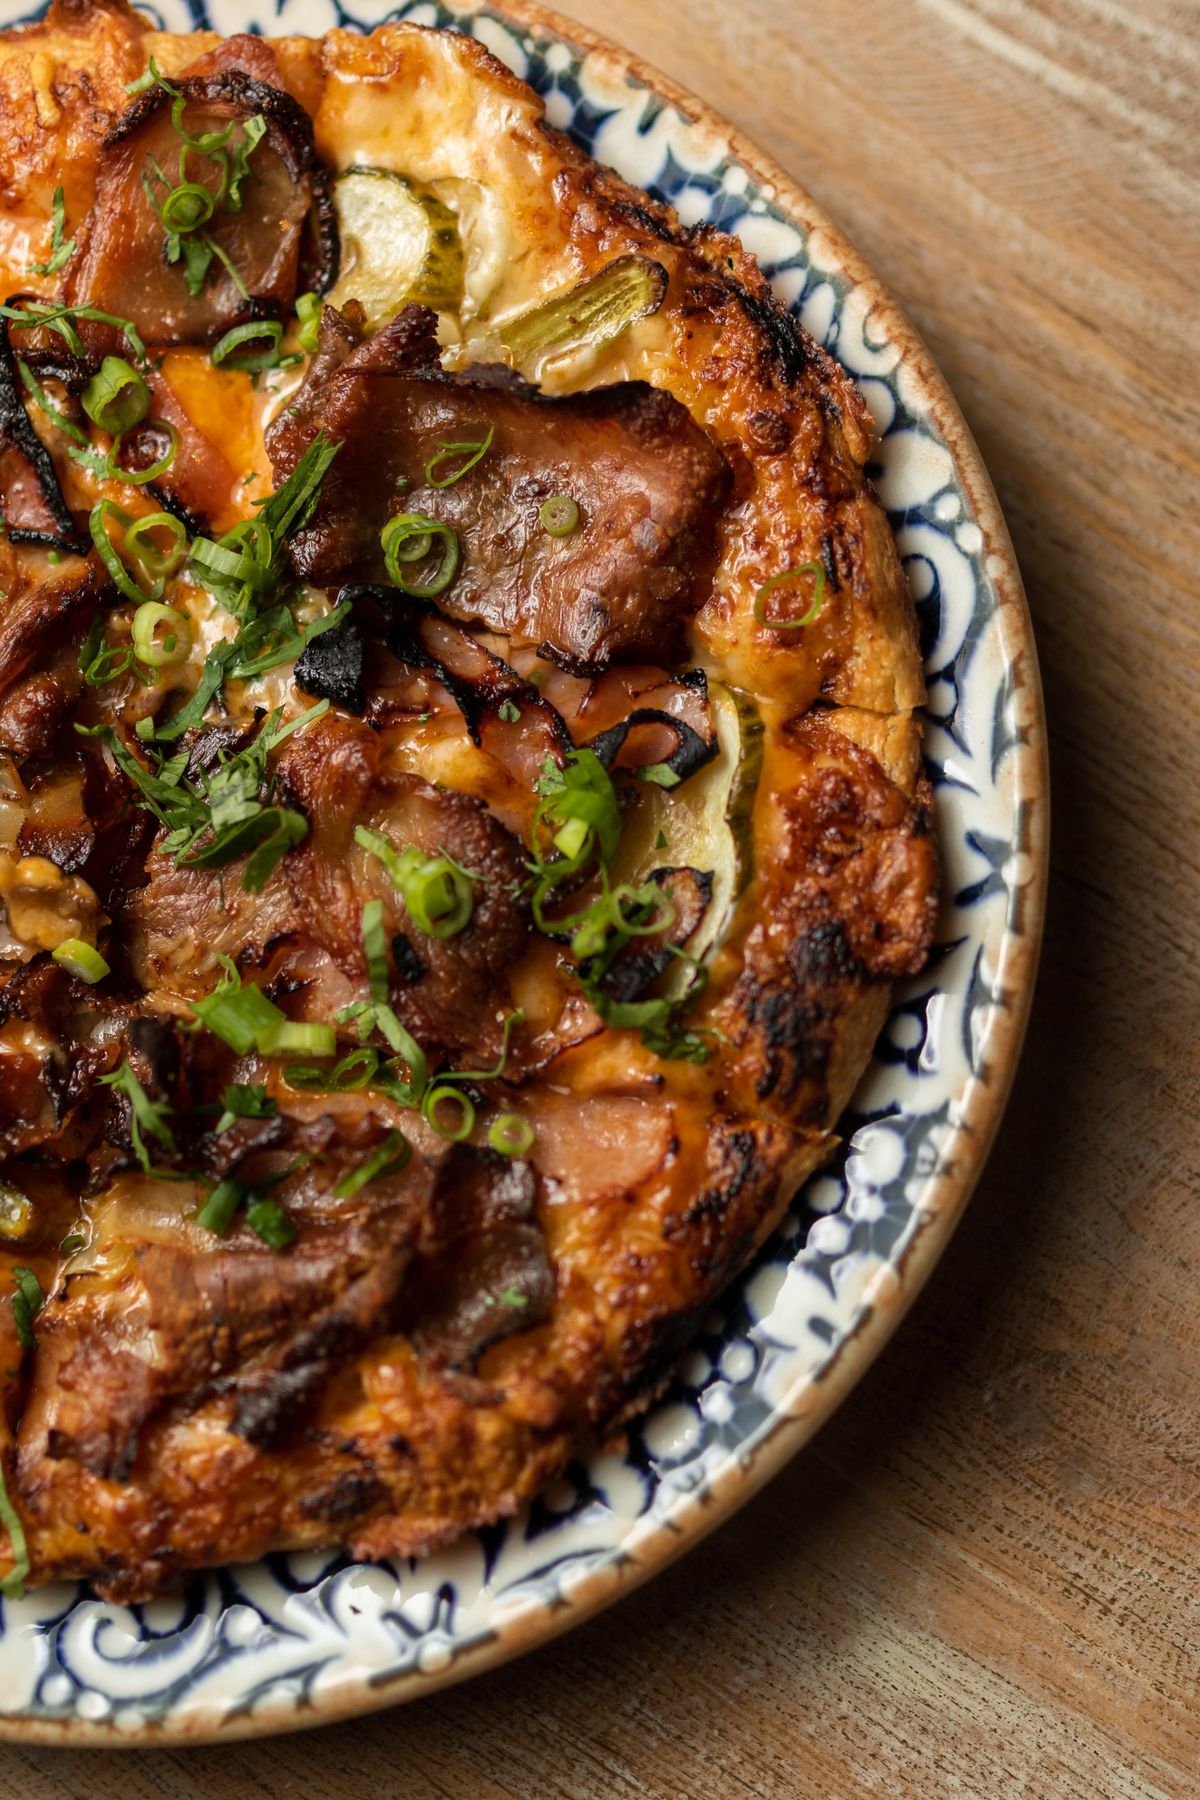 A crispy Cuban street pizza topped with lechon sits on a plate with a blue and white pattern